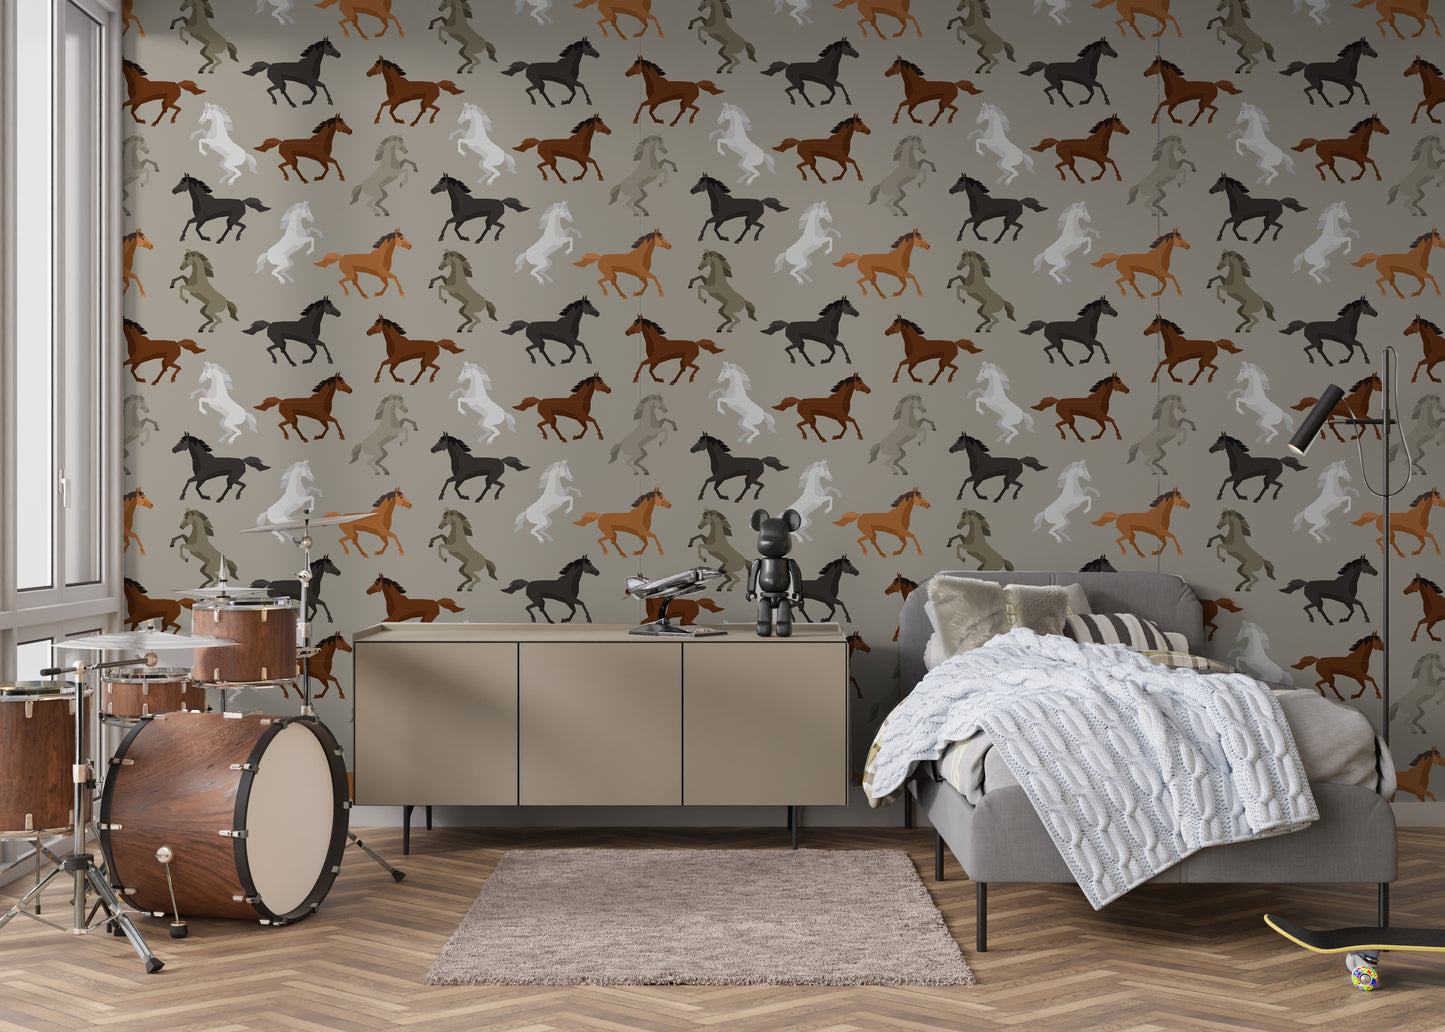 Horse Removable Peel And Stick Wallpaper